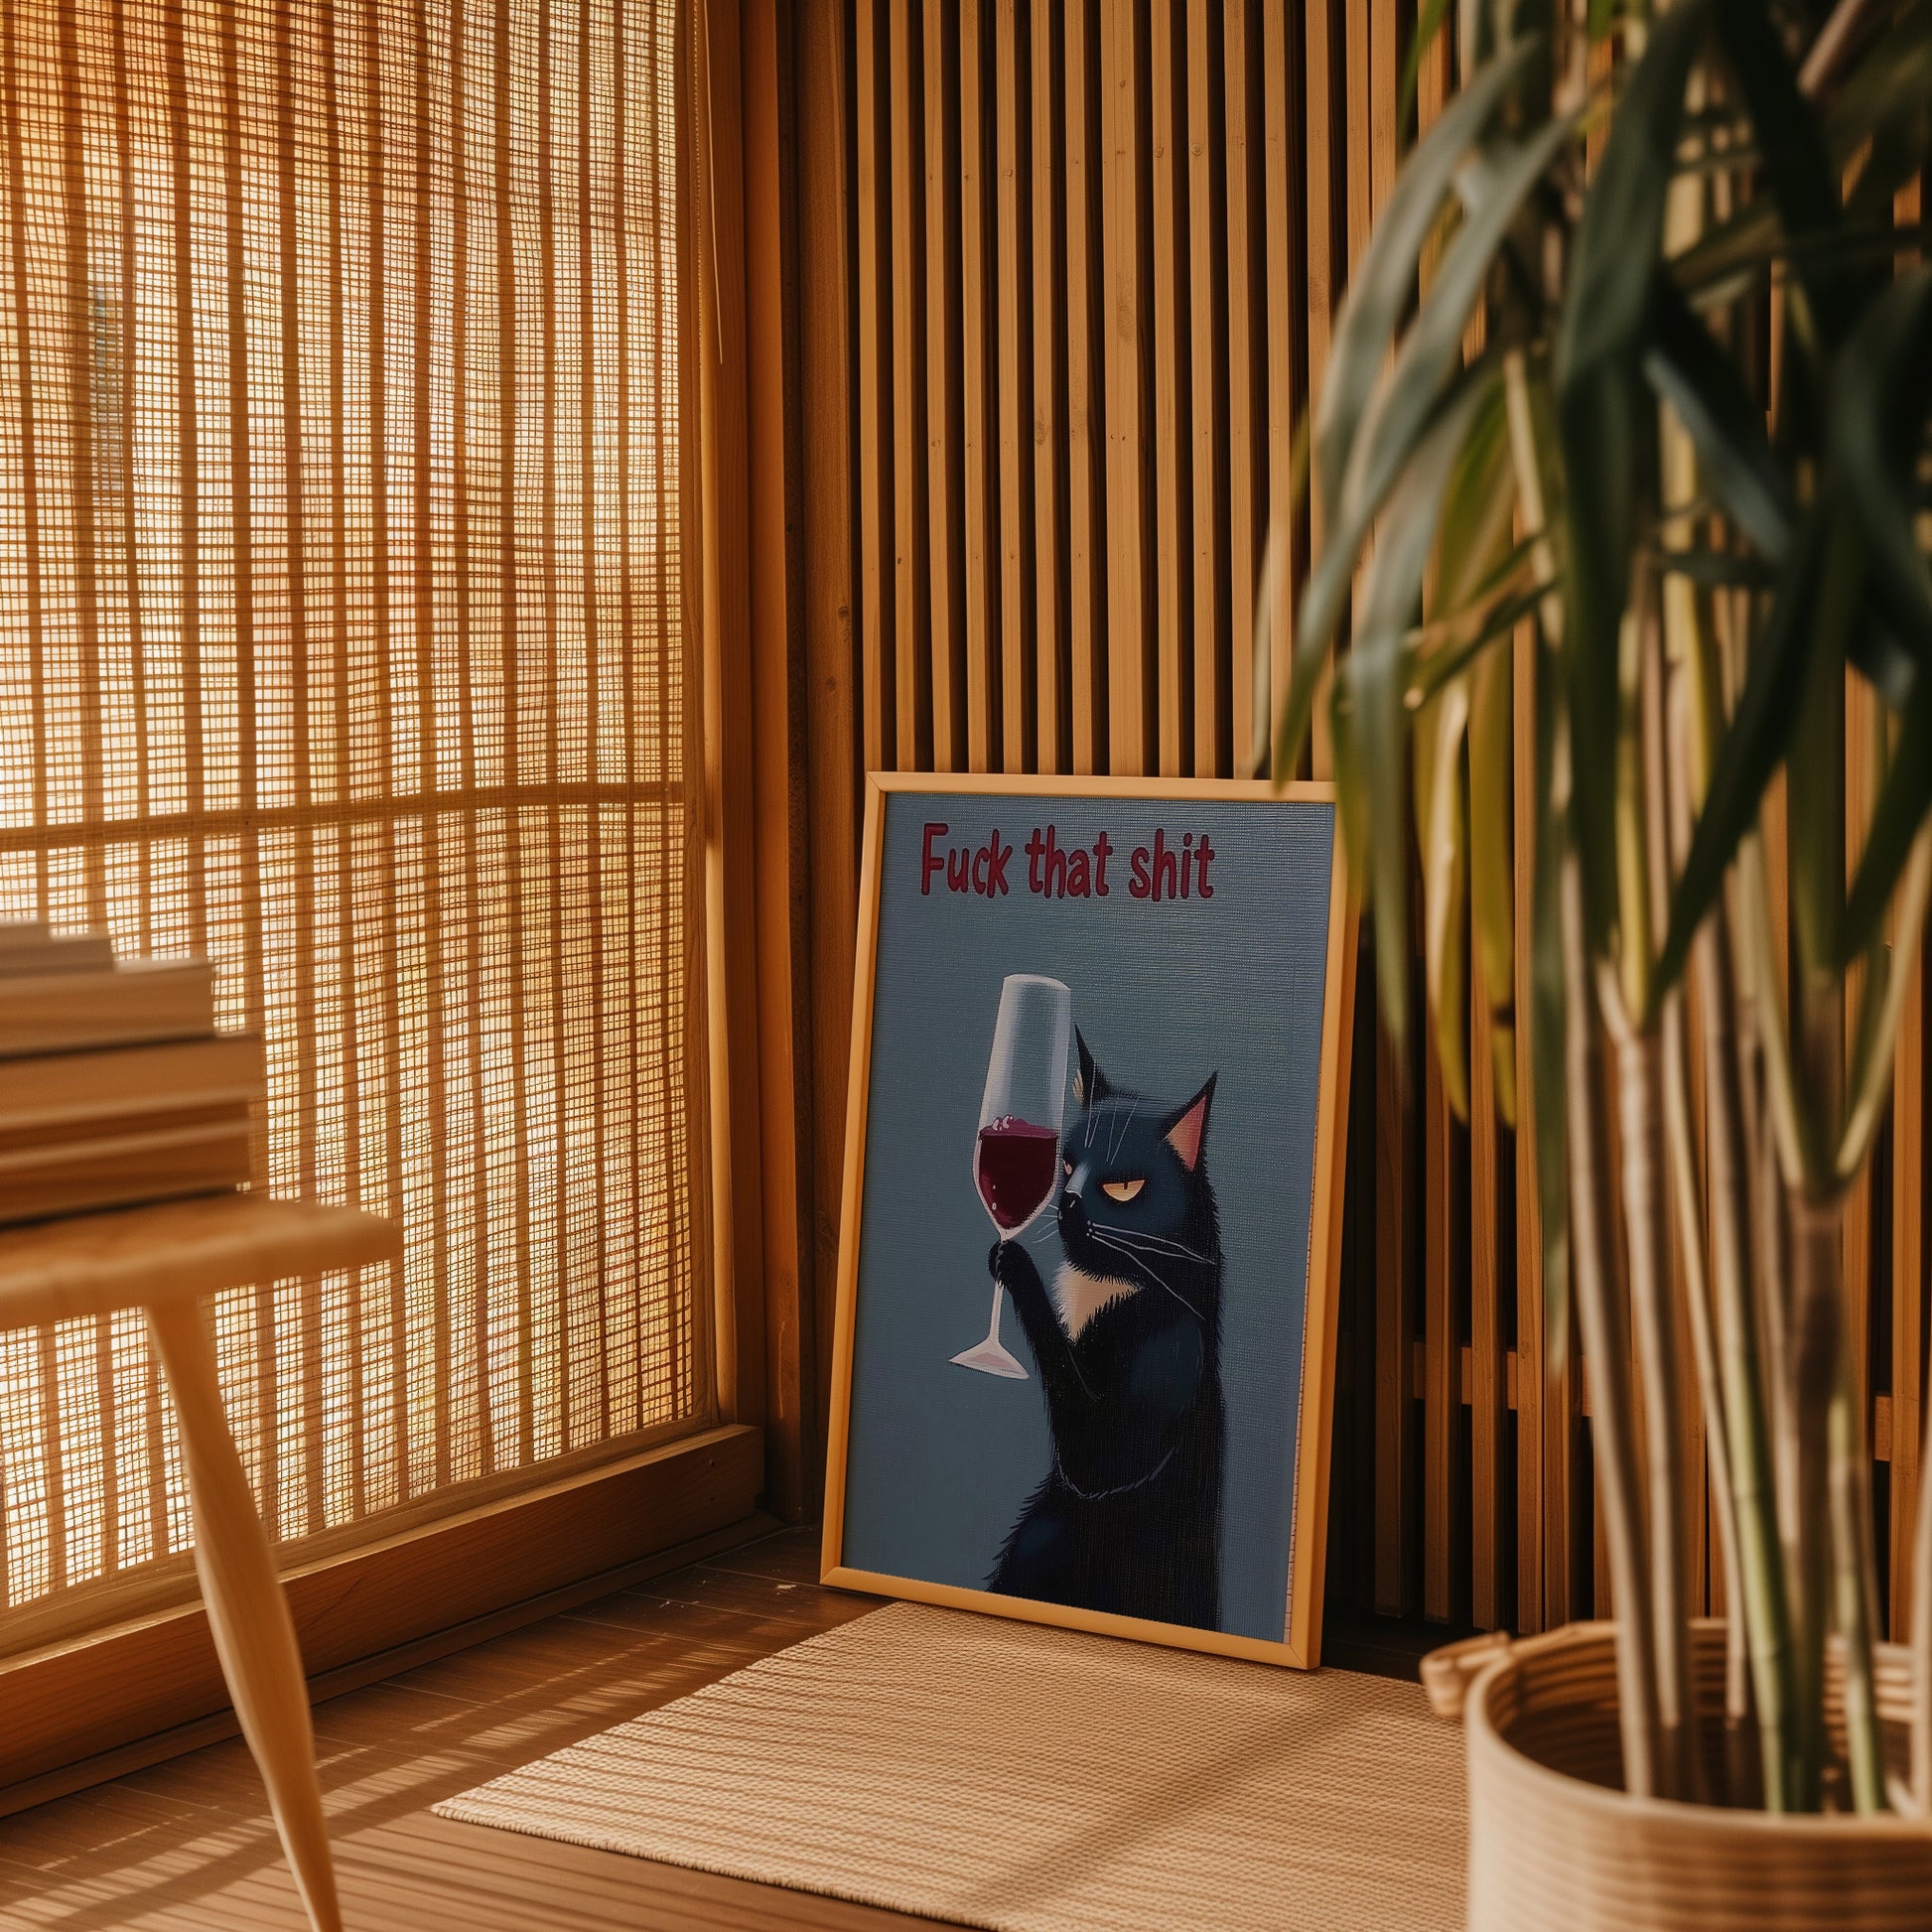 A canvas with a drawing of a cat holding a wine glass next to a window with blinds.